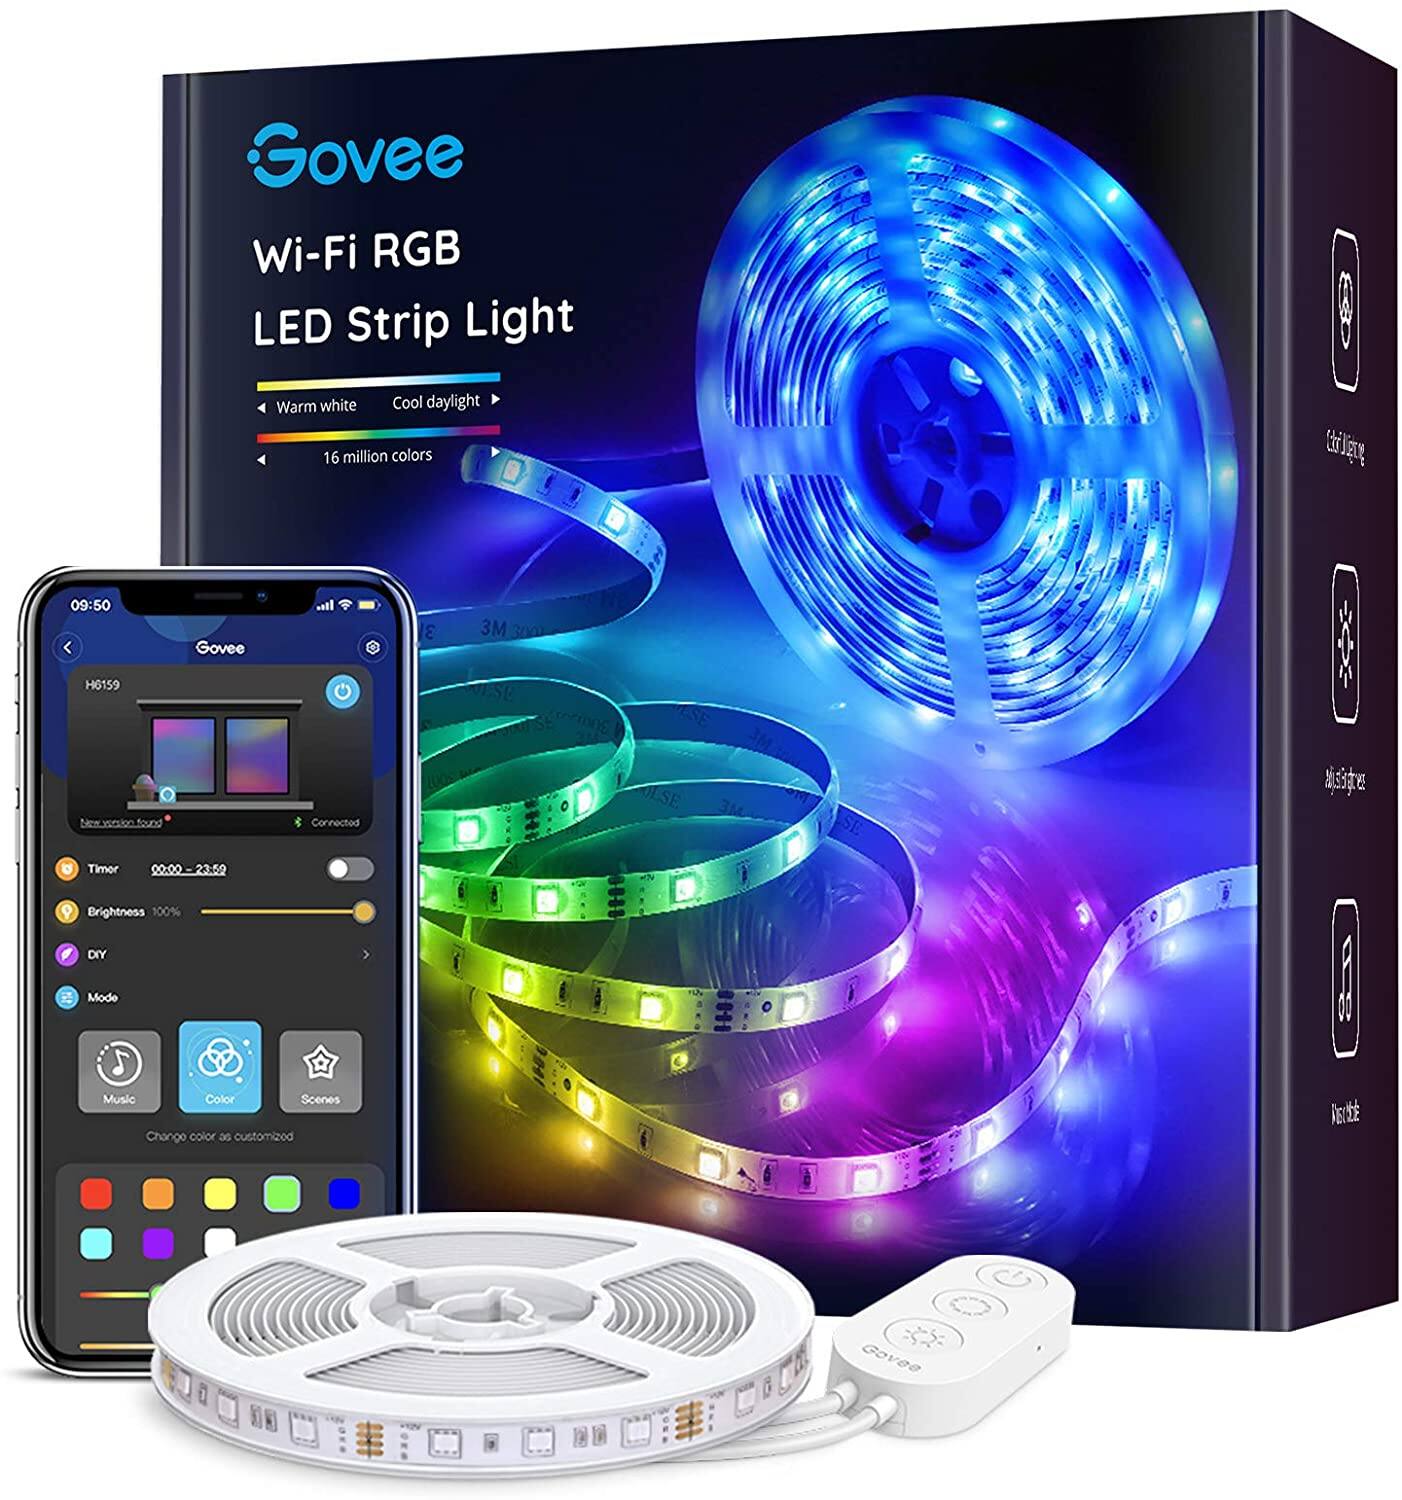 Govee16.4ft WiFi LED Strip Lights, Work with Alexa and Google Assistant, Bright 5050 LEDs, 16 Million Colors with App Control and Music Sync  - $13.99 + FS